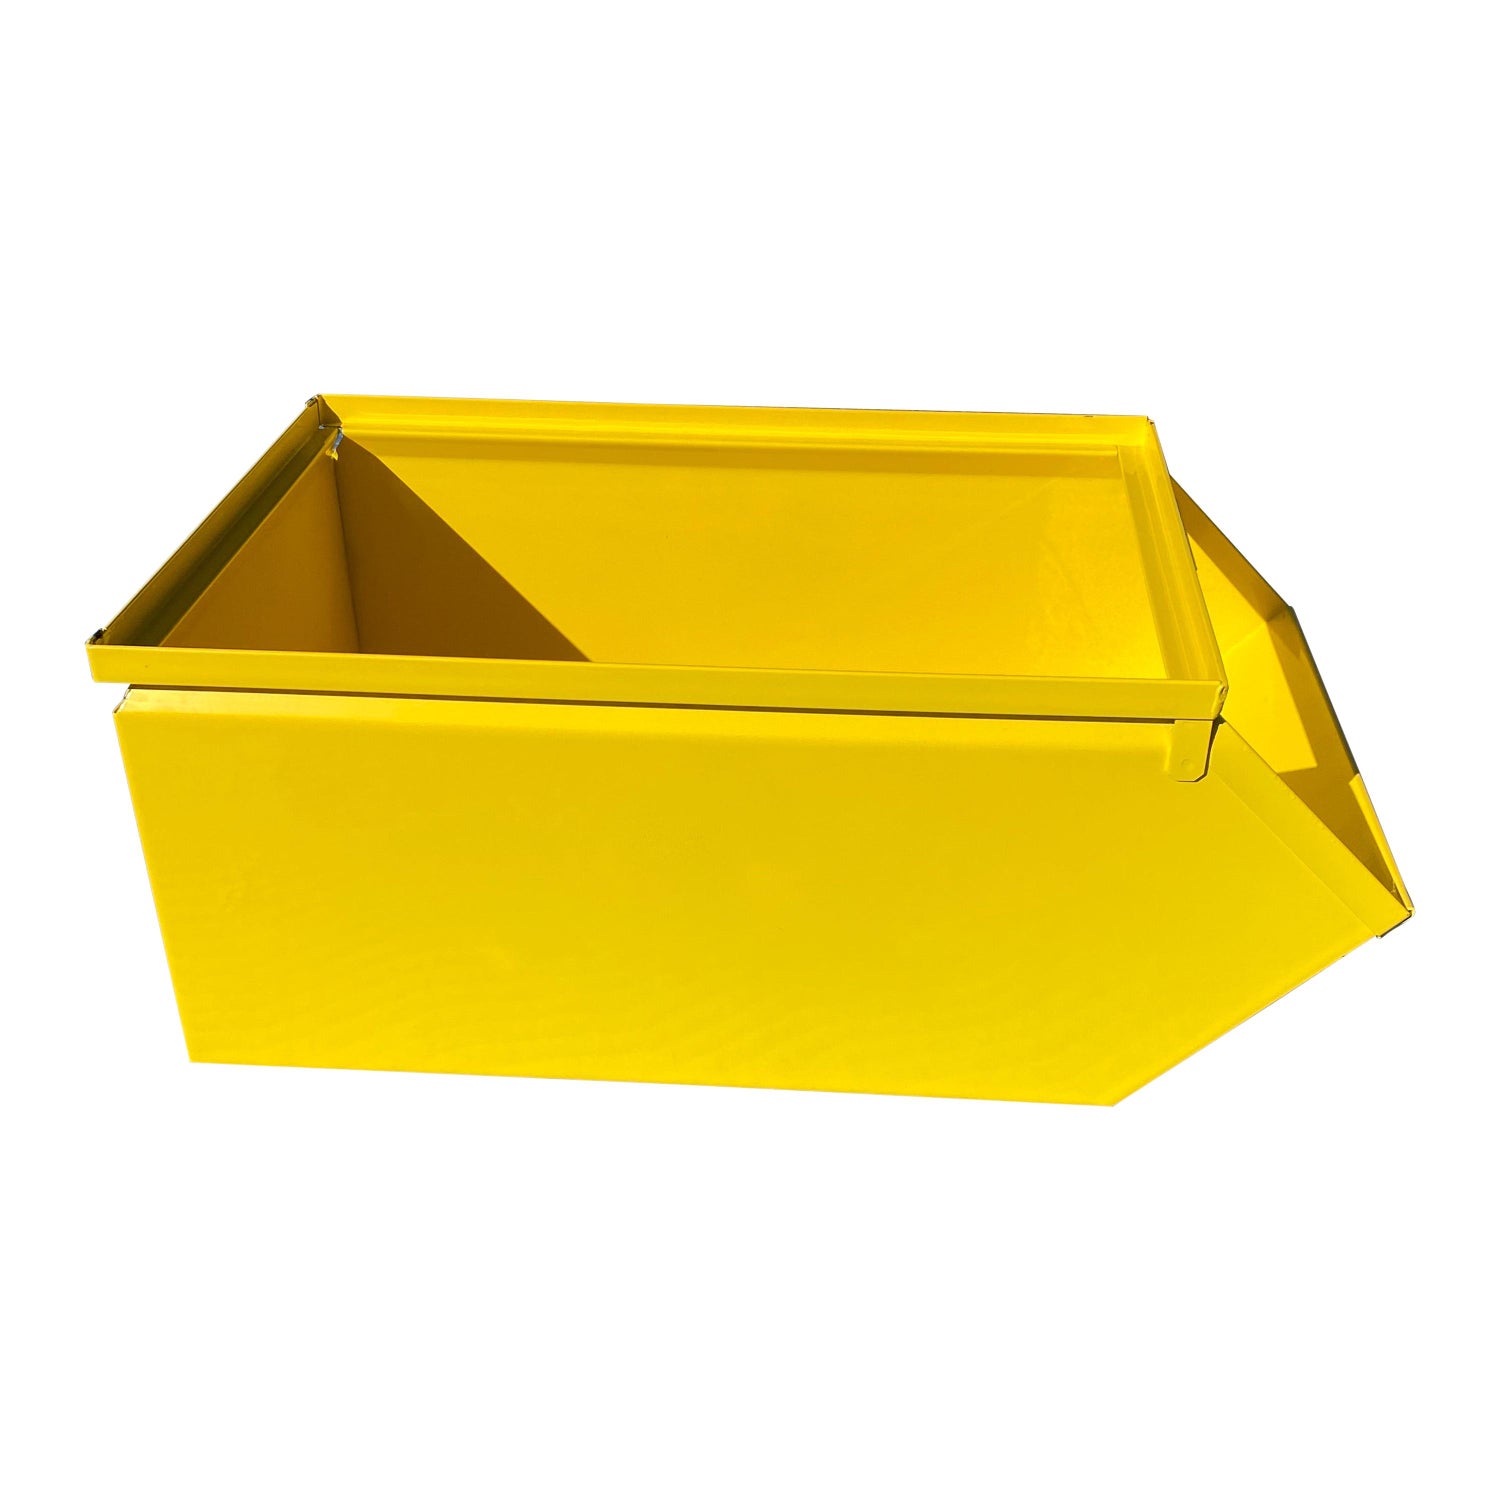 https://a.1stdibscdn.com/collection-of-large-industrial-powder-coated-sunshine-yellow-metal-bin-boxes-for-sale/1121189/f_180942921582960656569/18094292_master.jpg?width=1500